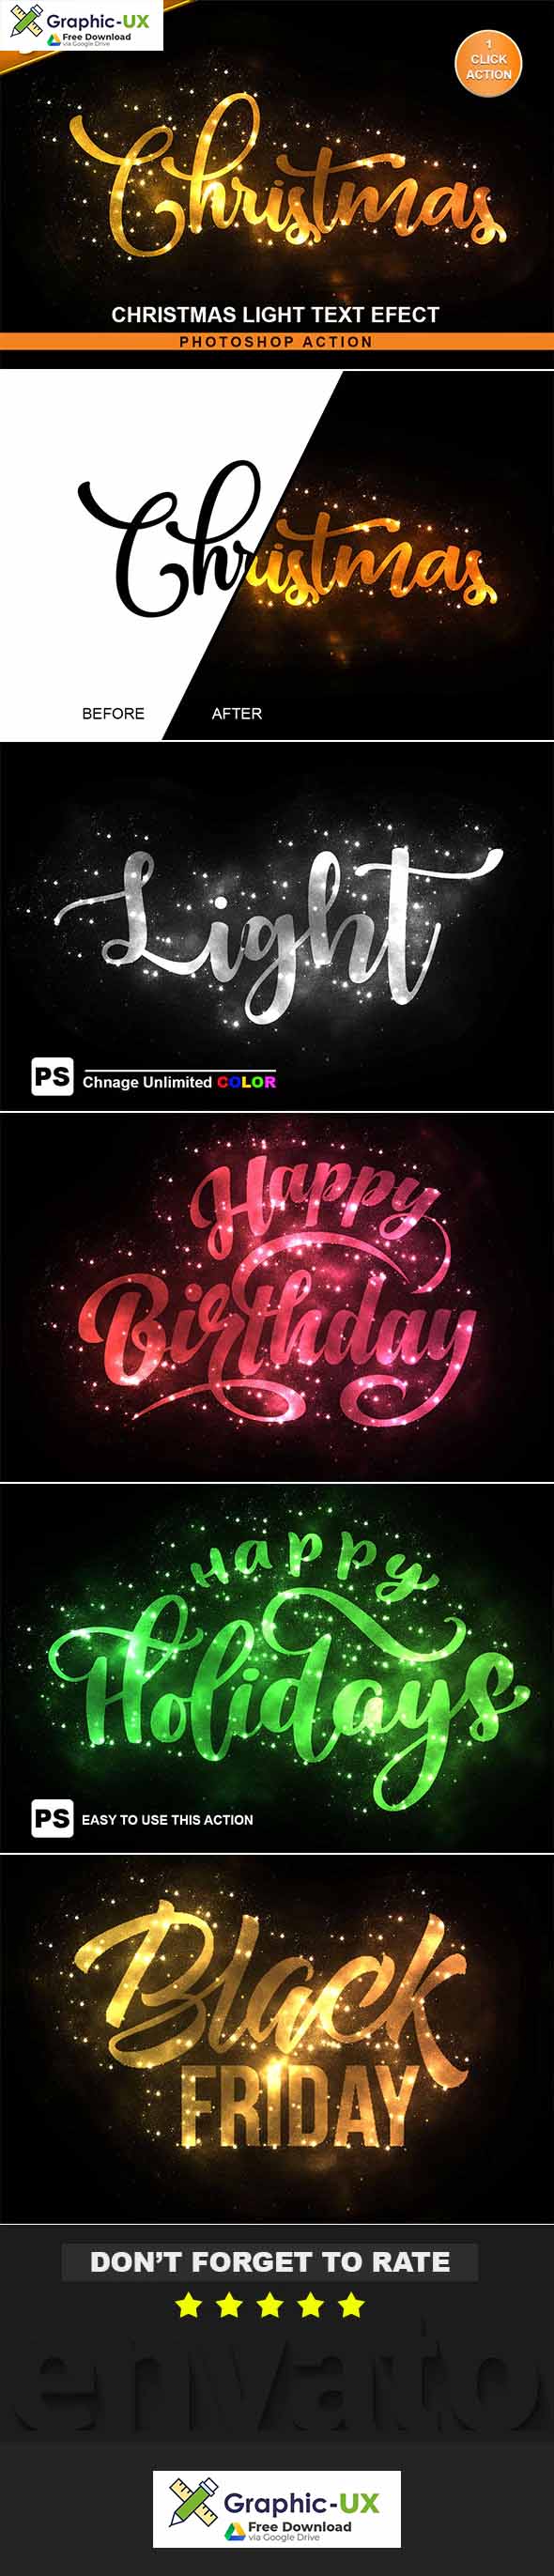 Christmas Text Effect Photoshop Action 